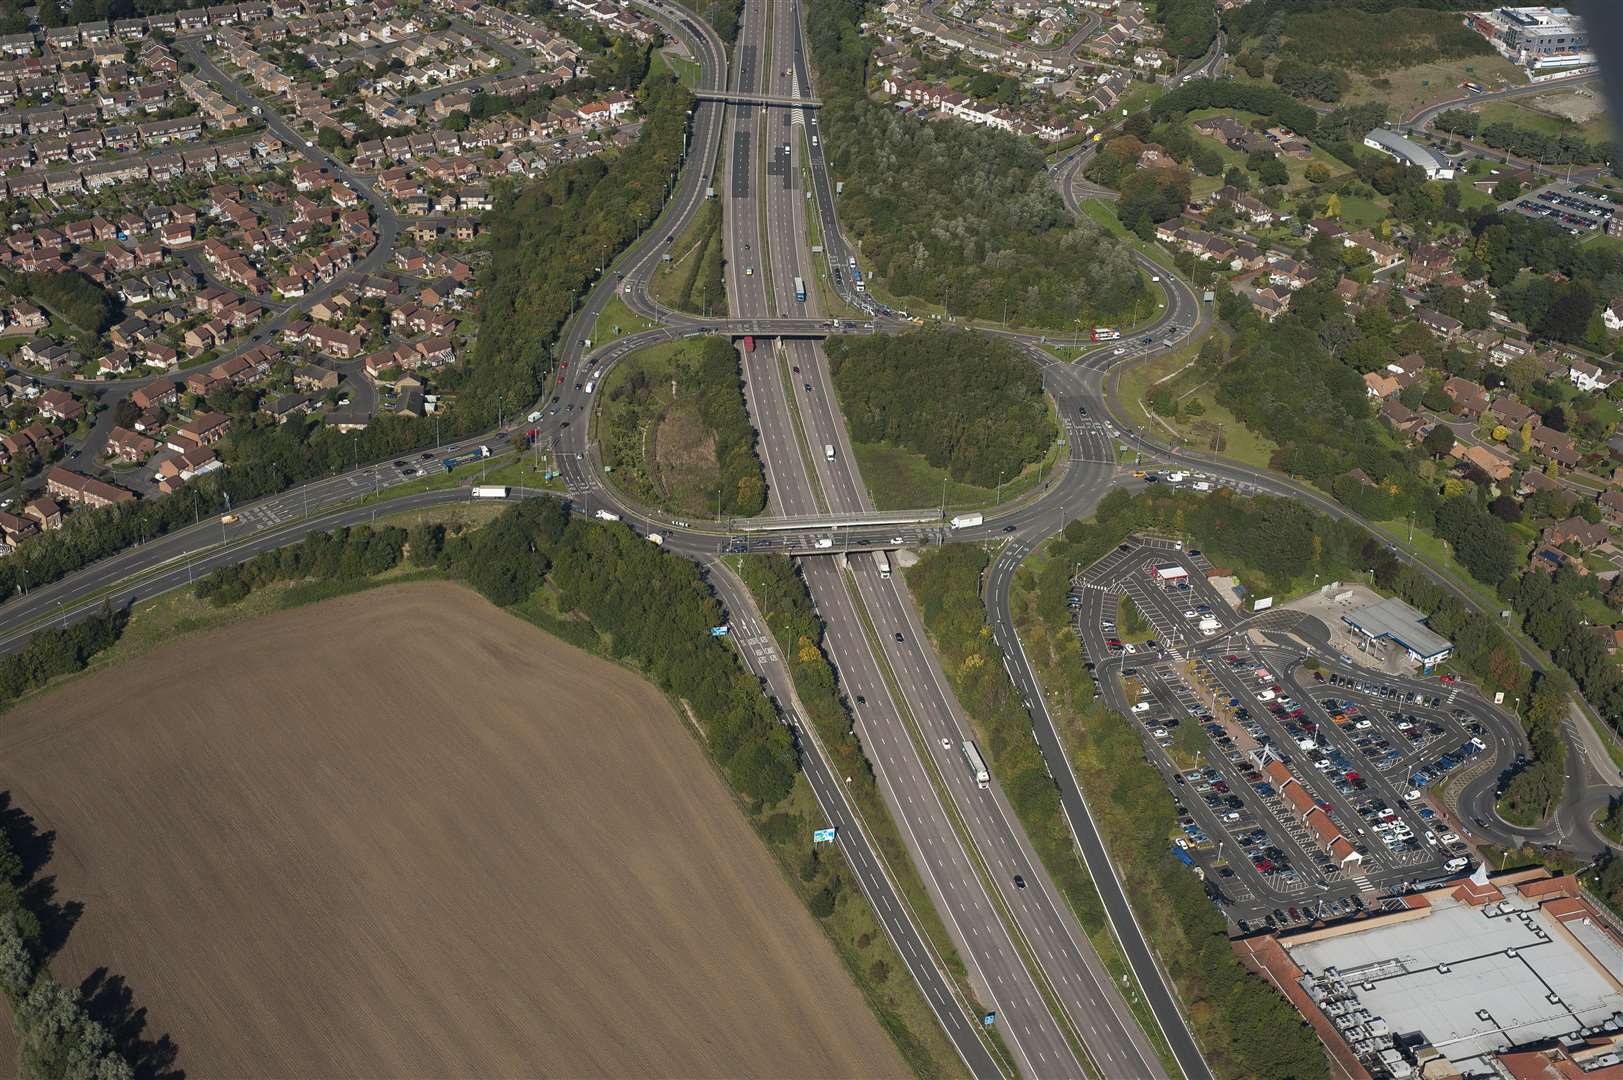 Junction 10 roundabout. Credit: Ady Kerry (889420)